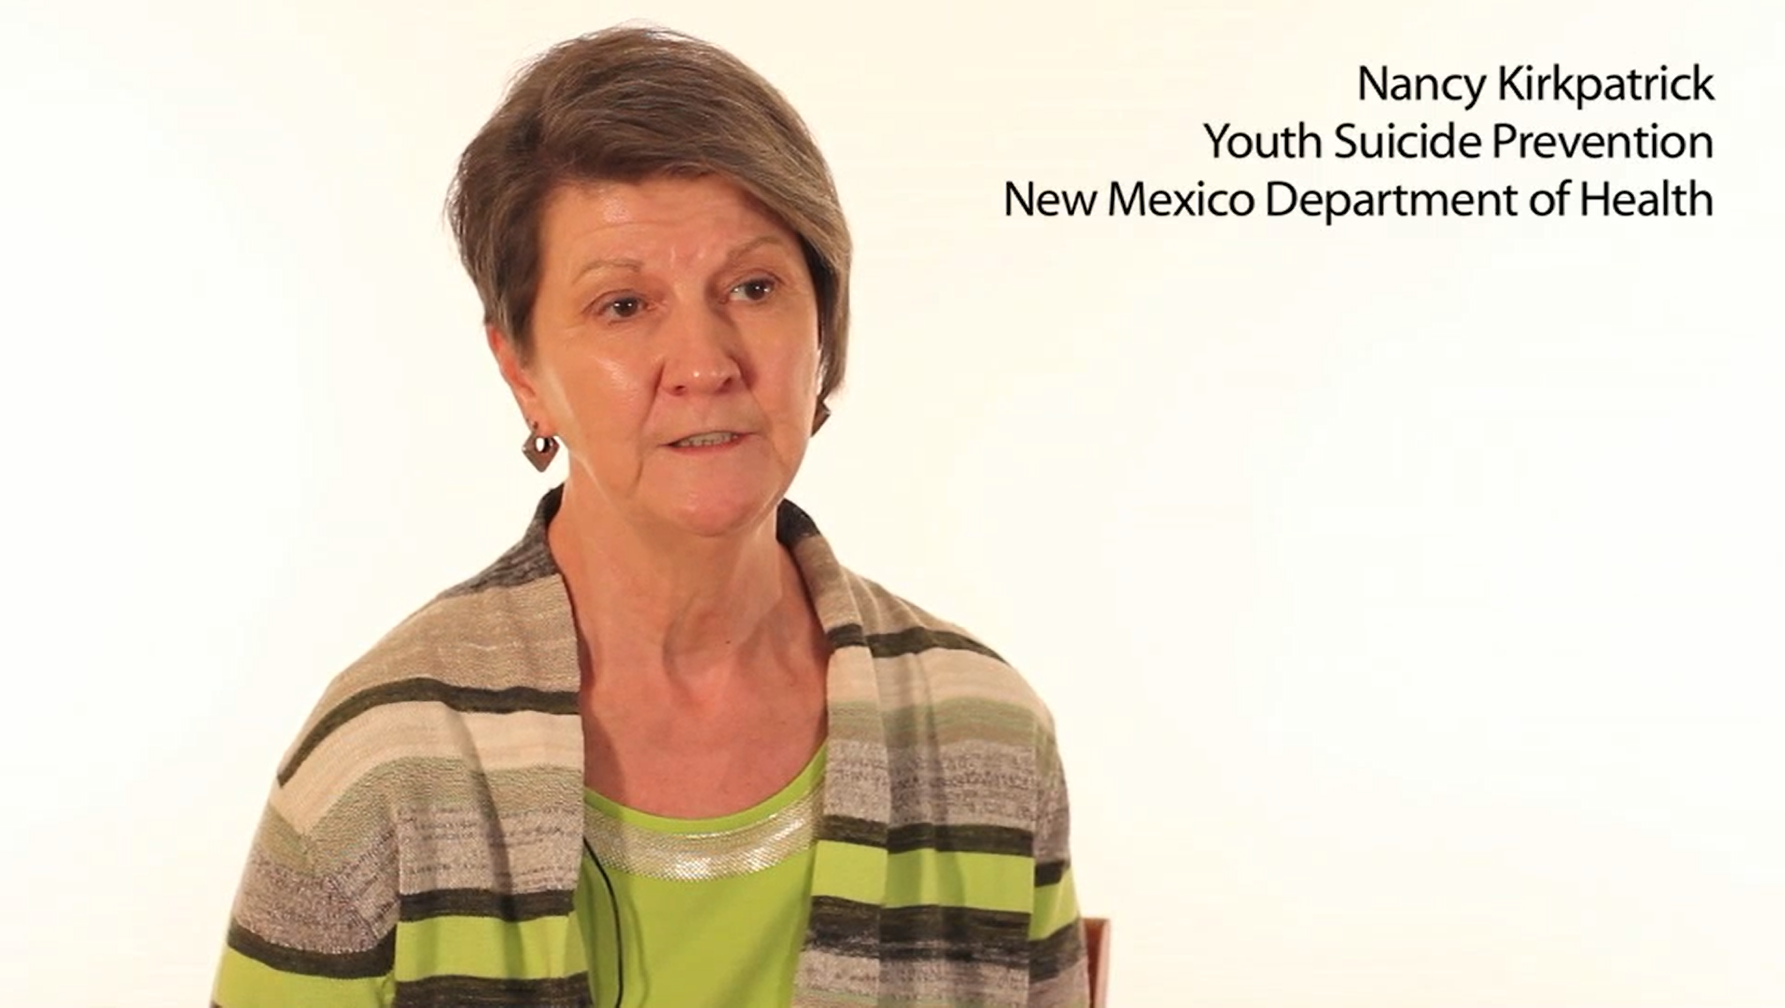 New Mexico Dept. of Health Discussing Talks About Kognito Mental Health Simulations